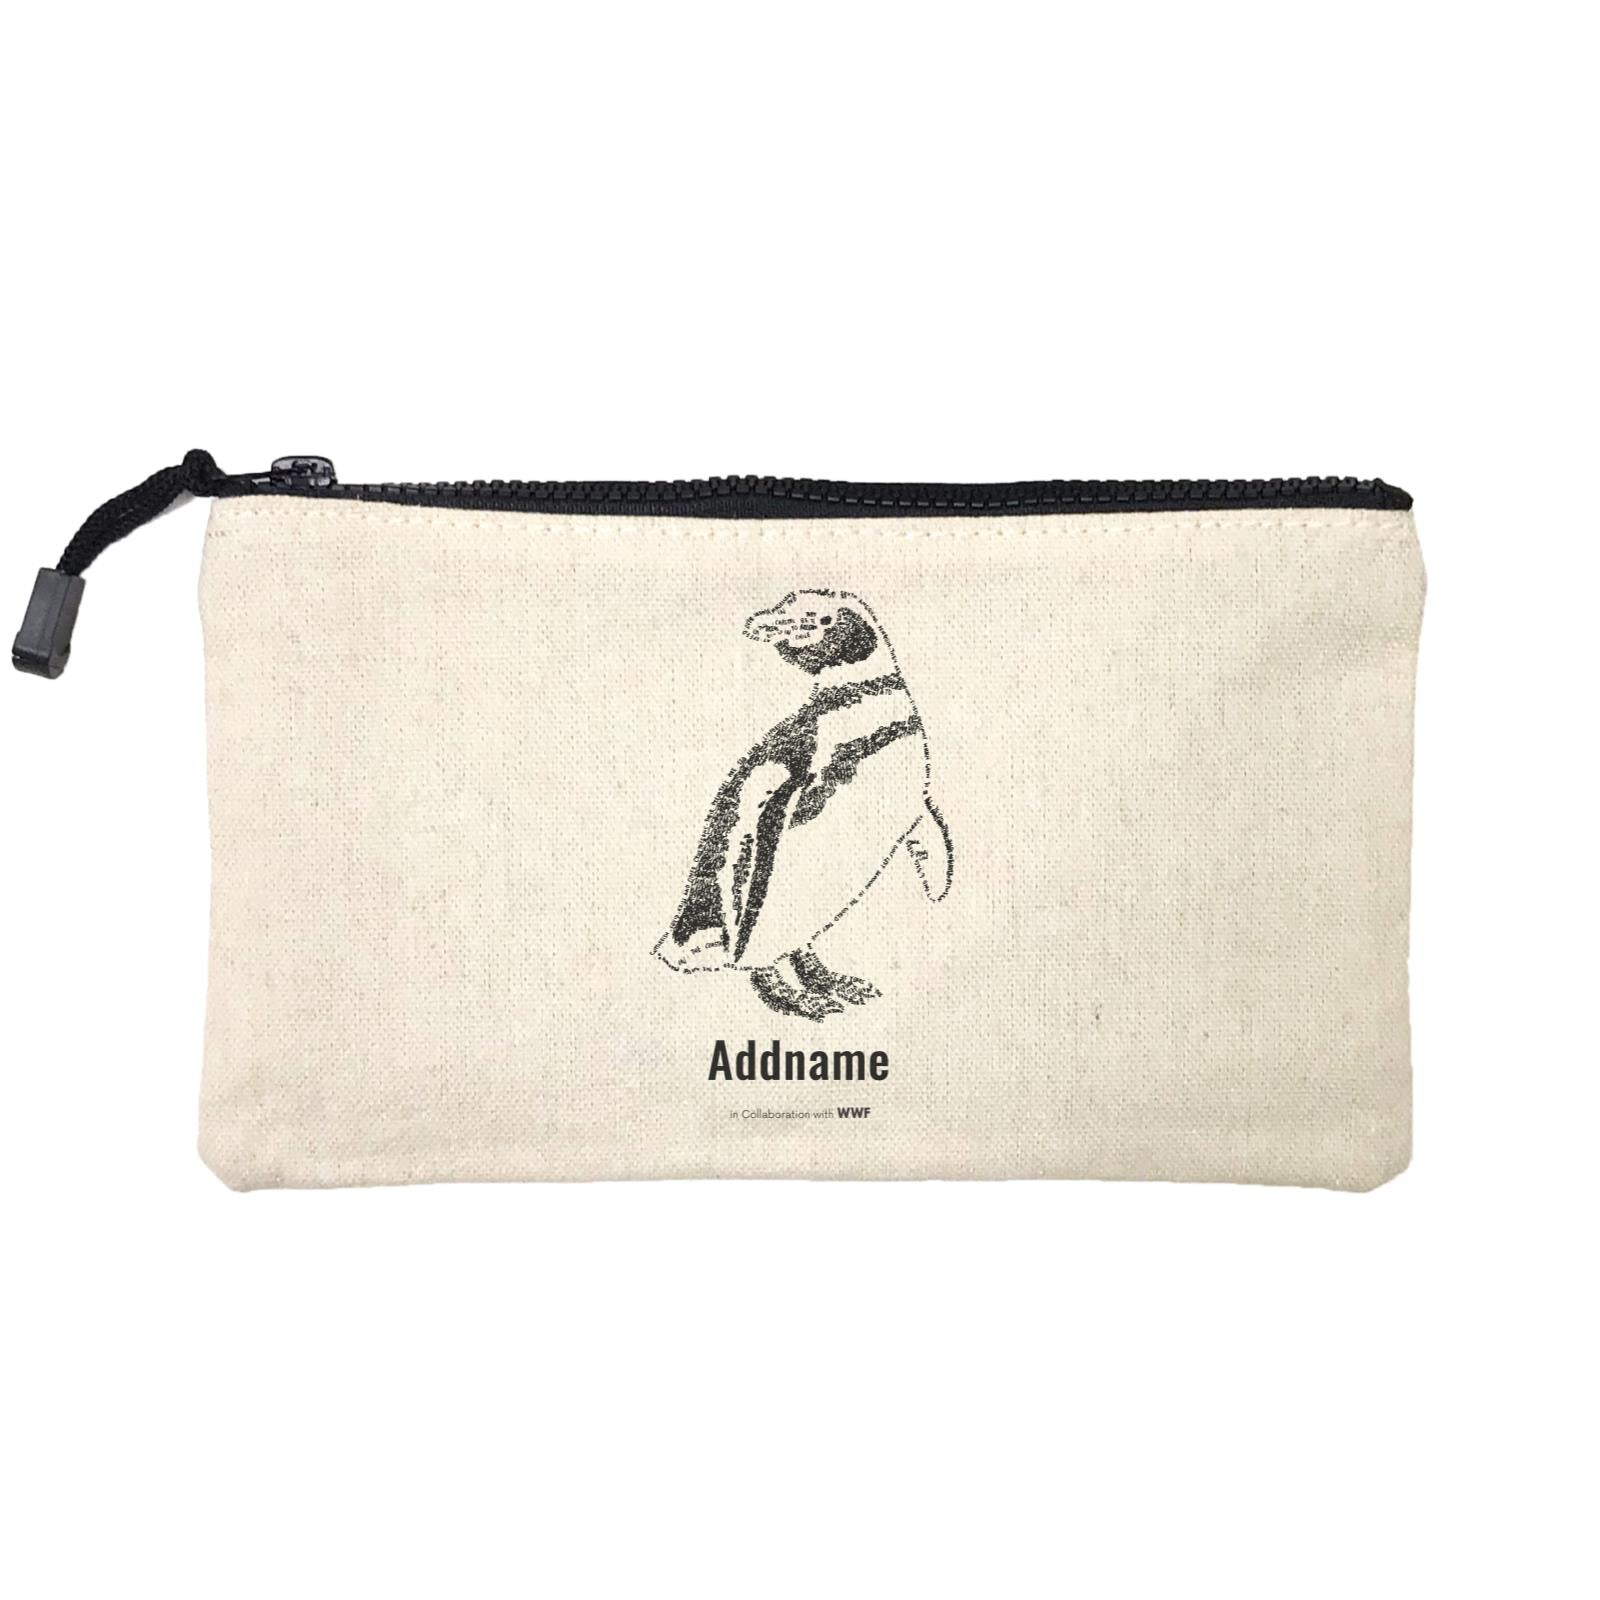 Hand Written Animals Magellanic Penguins By ArtC Addname Mini Accessories Stationery Pouch